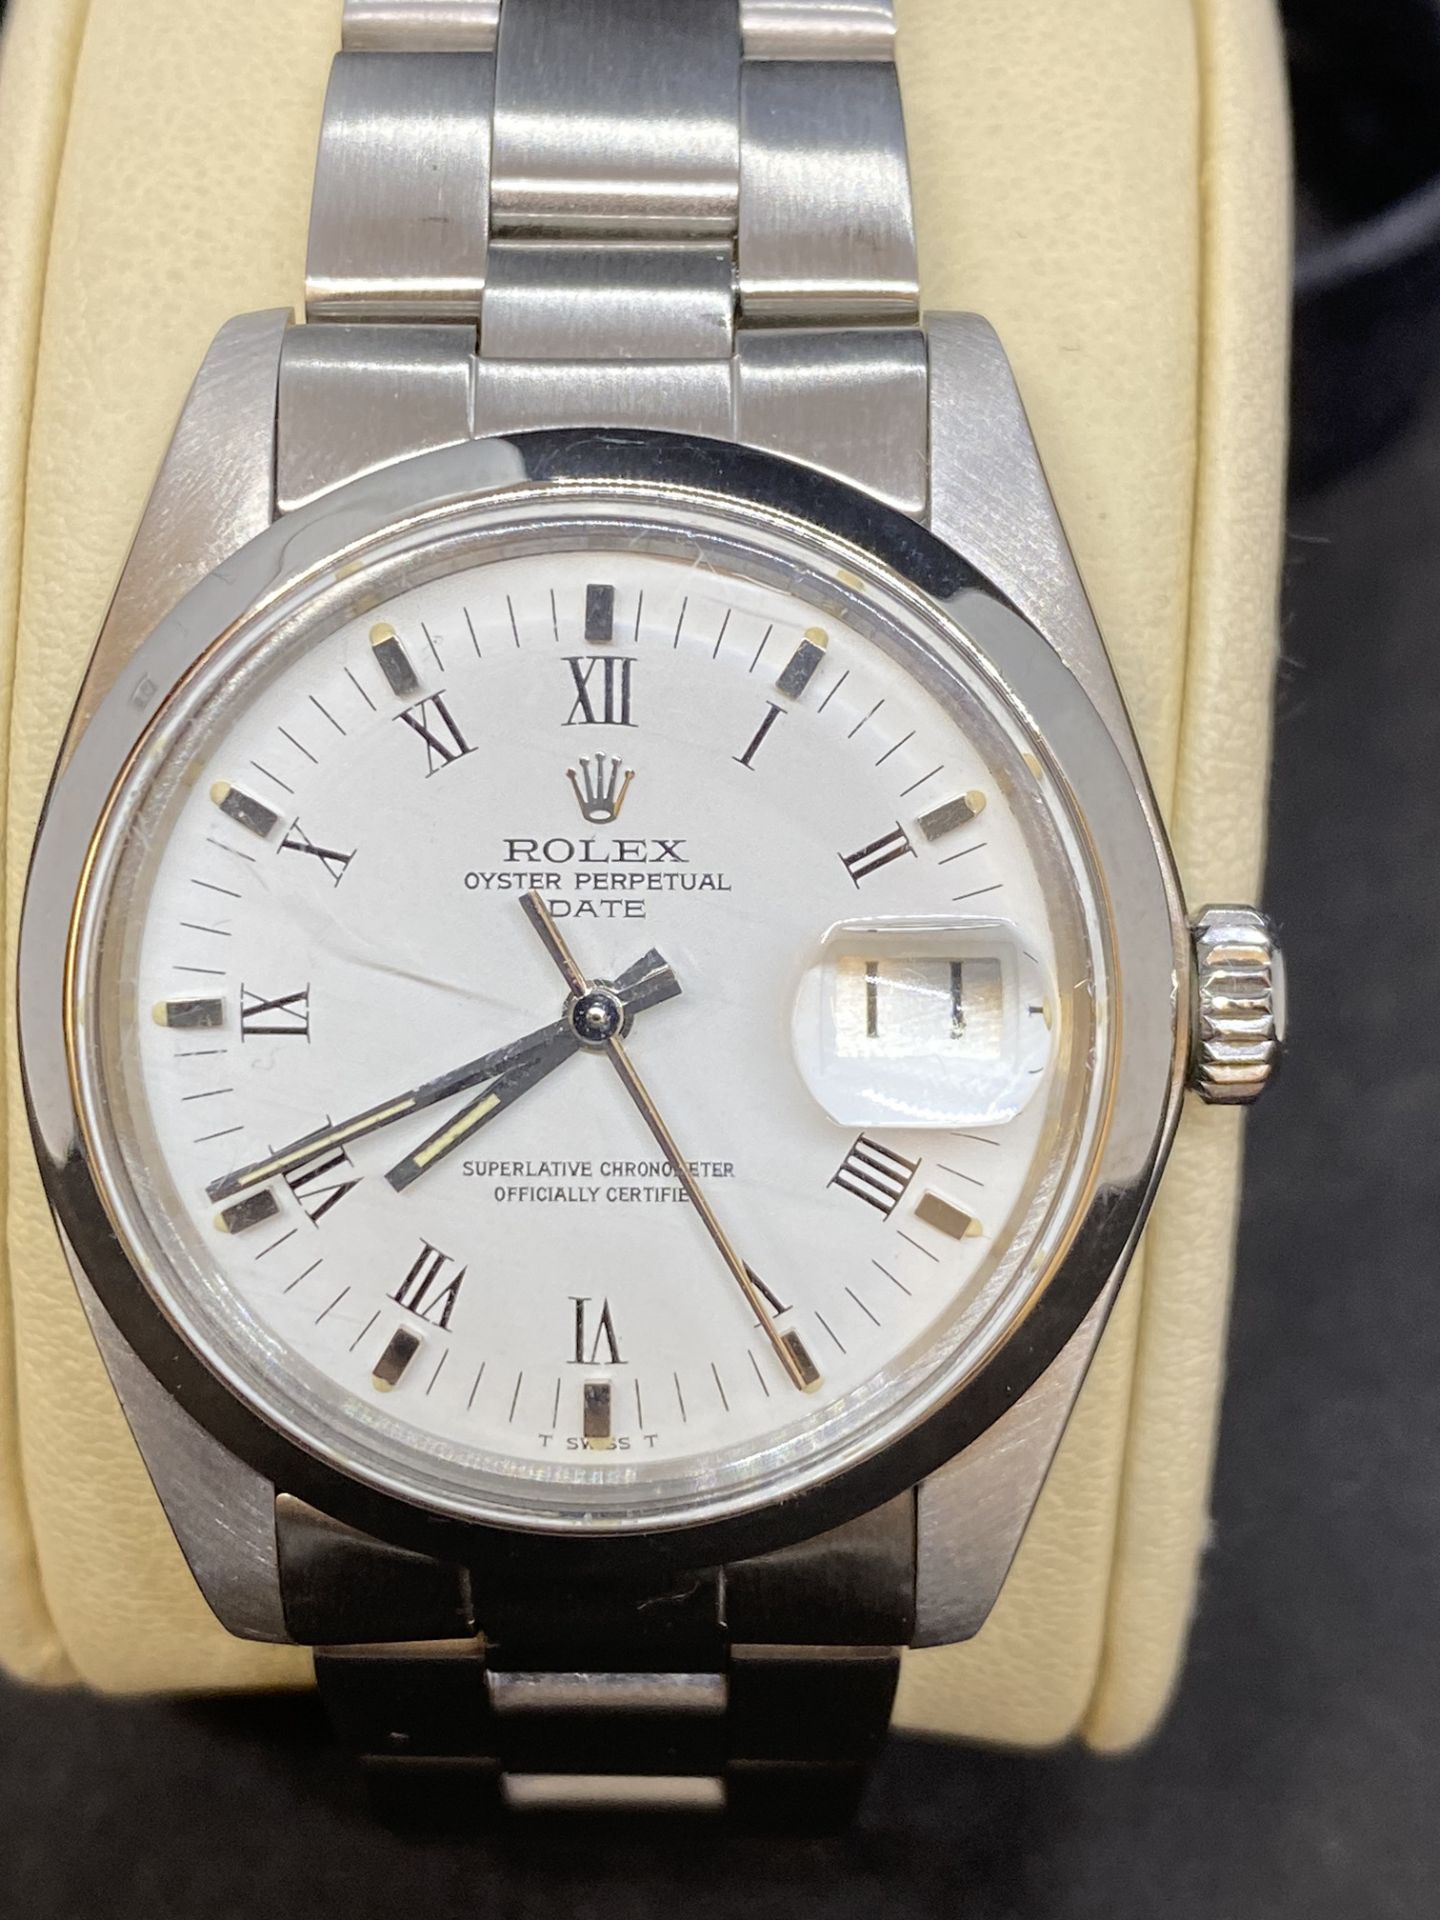 STAINLESS STEEL ROLEX OYSTER PERPETUAL DATE WATCH - Image 4 of 11